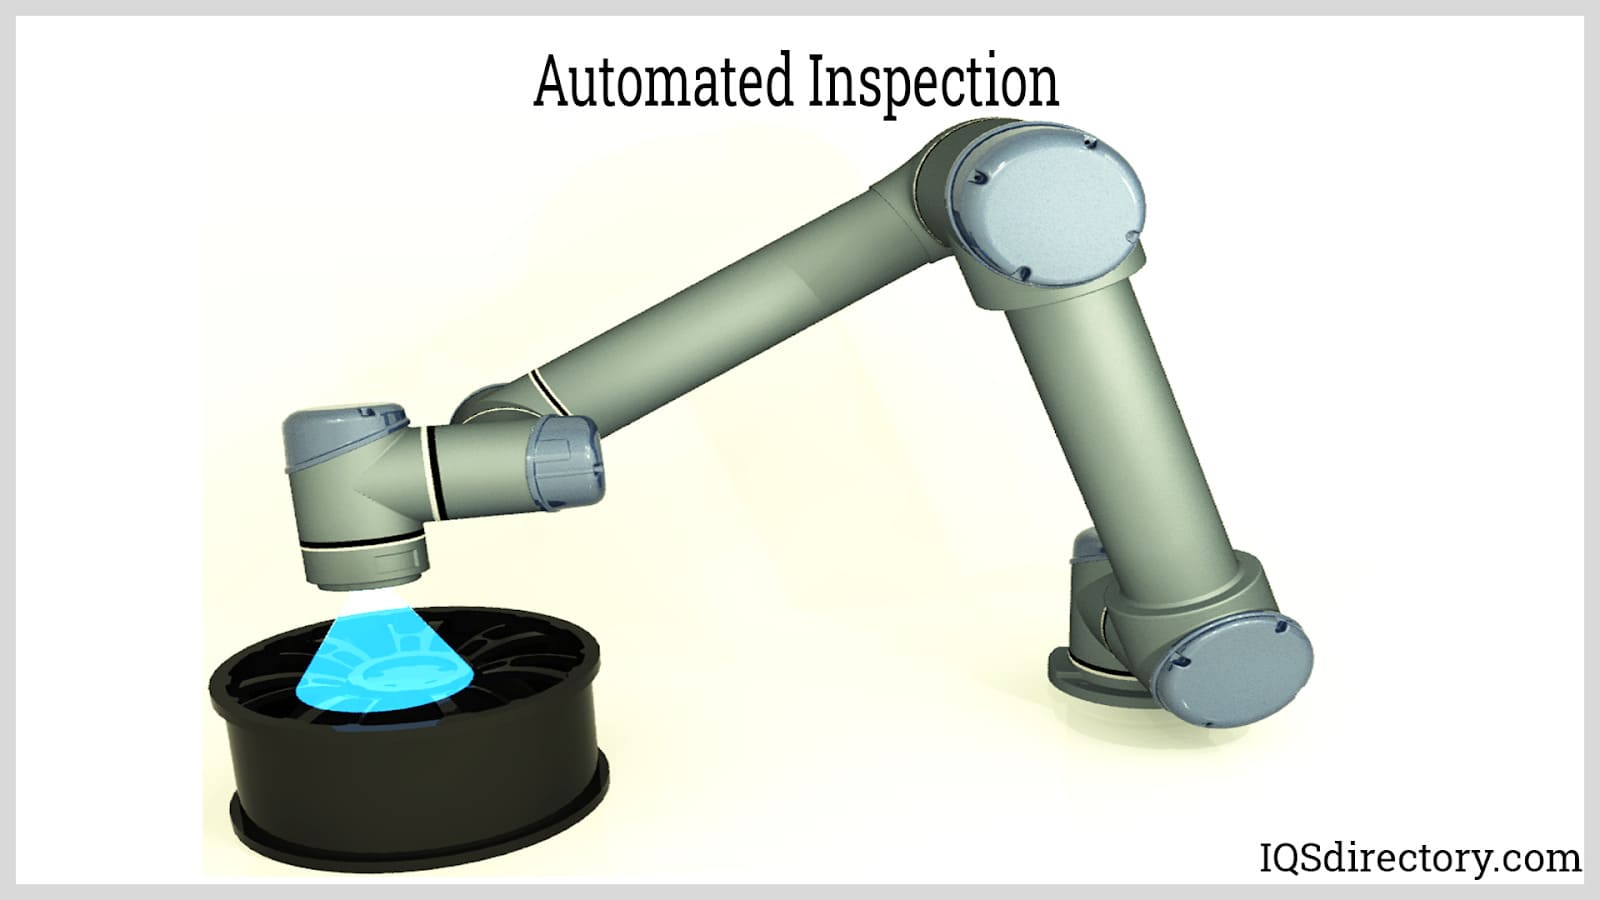 Automated Inspection